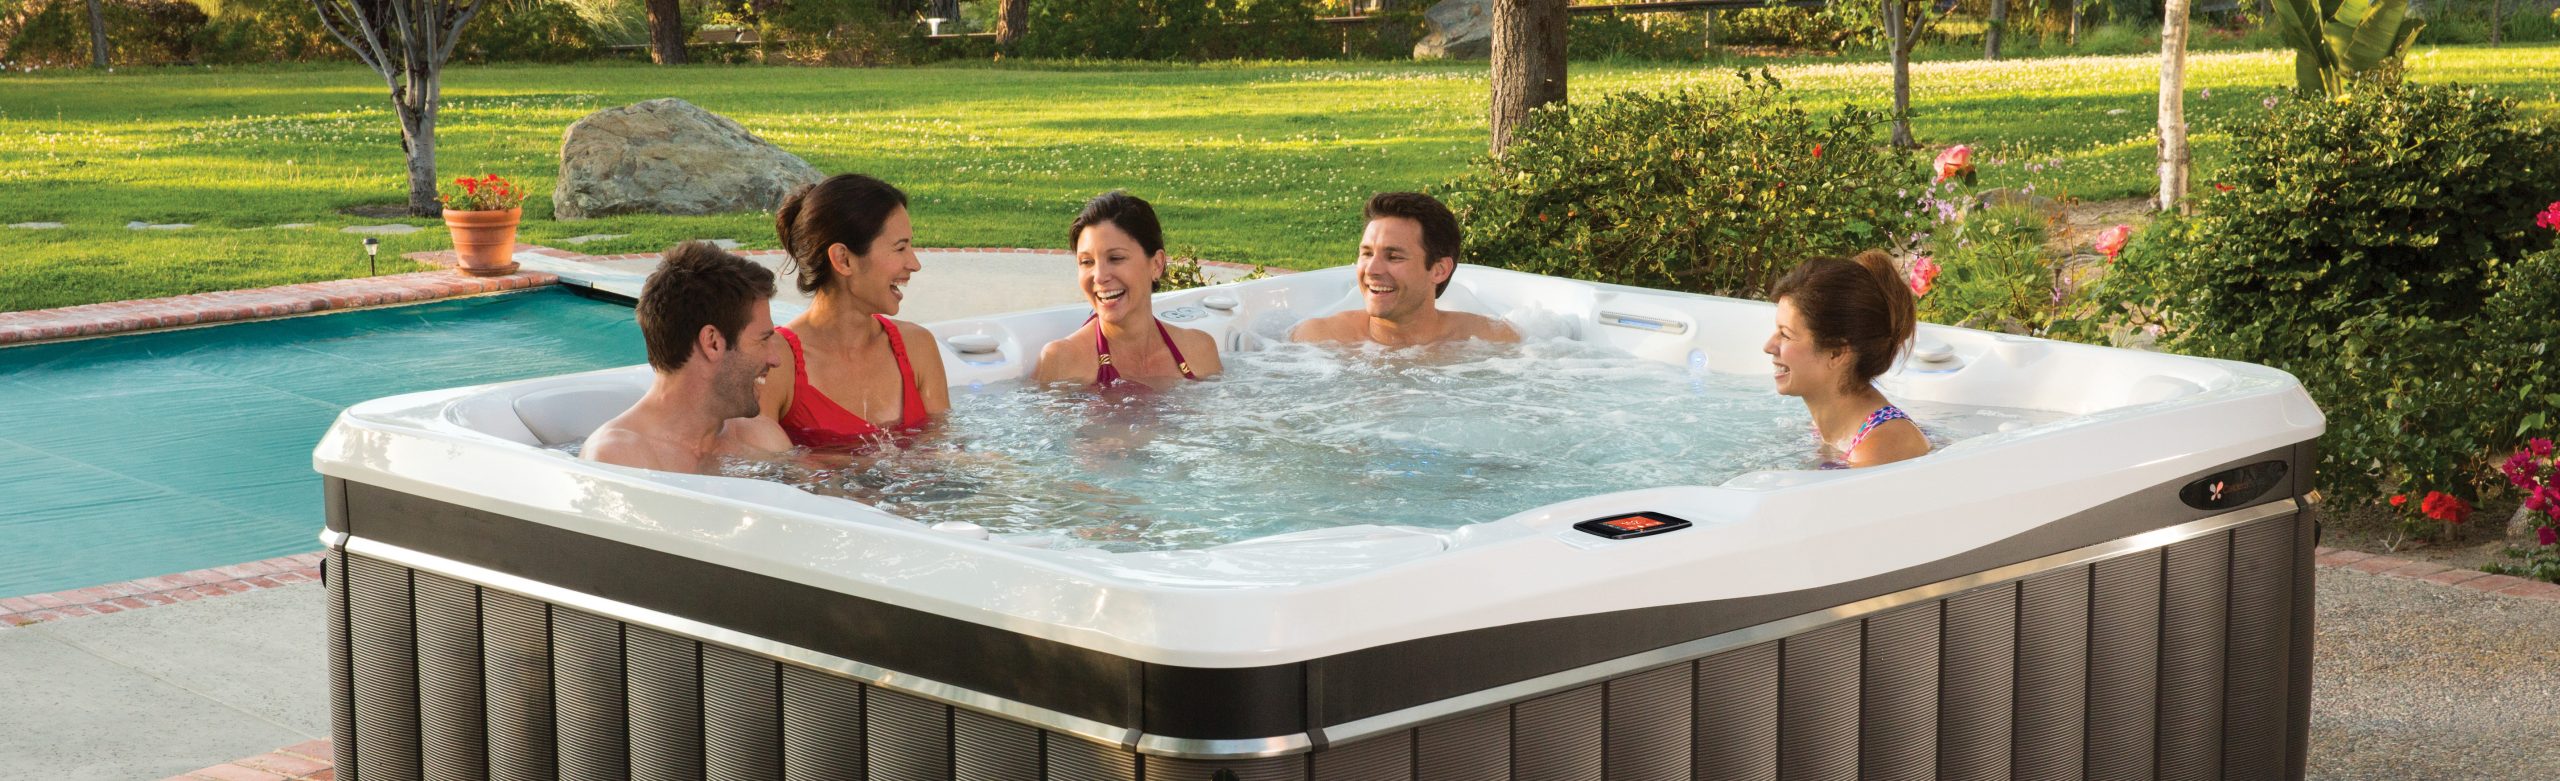 Hot Tub Entertainment For Your Family